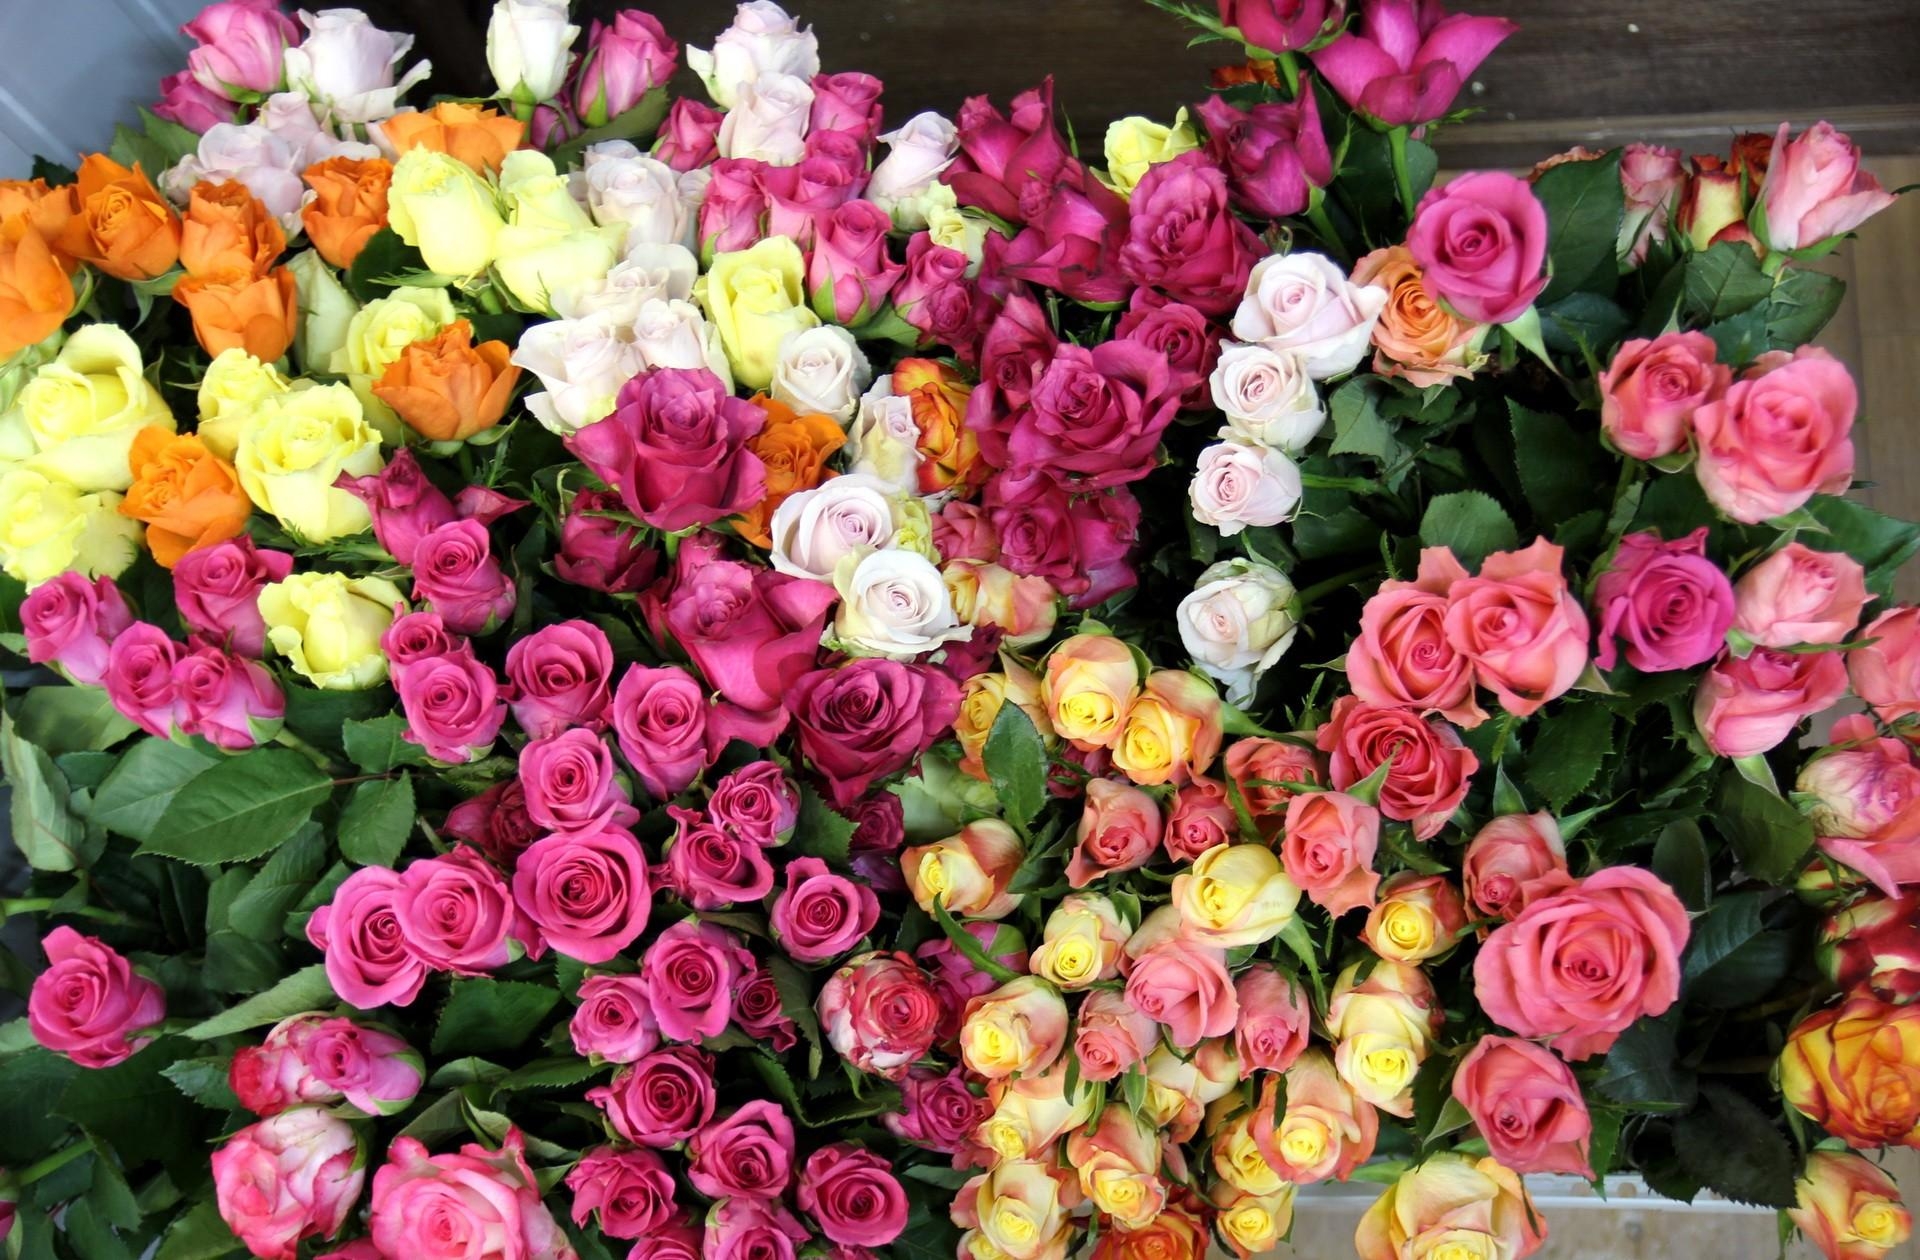 Widescreen image multicolored, flowers, roses